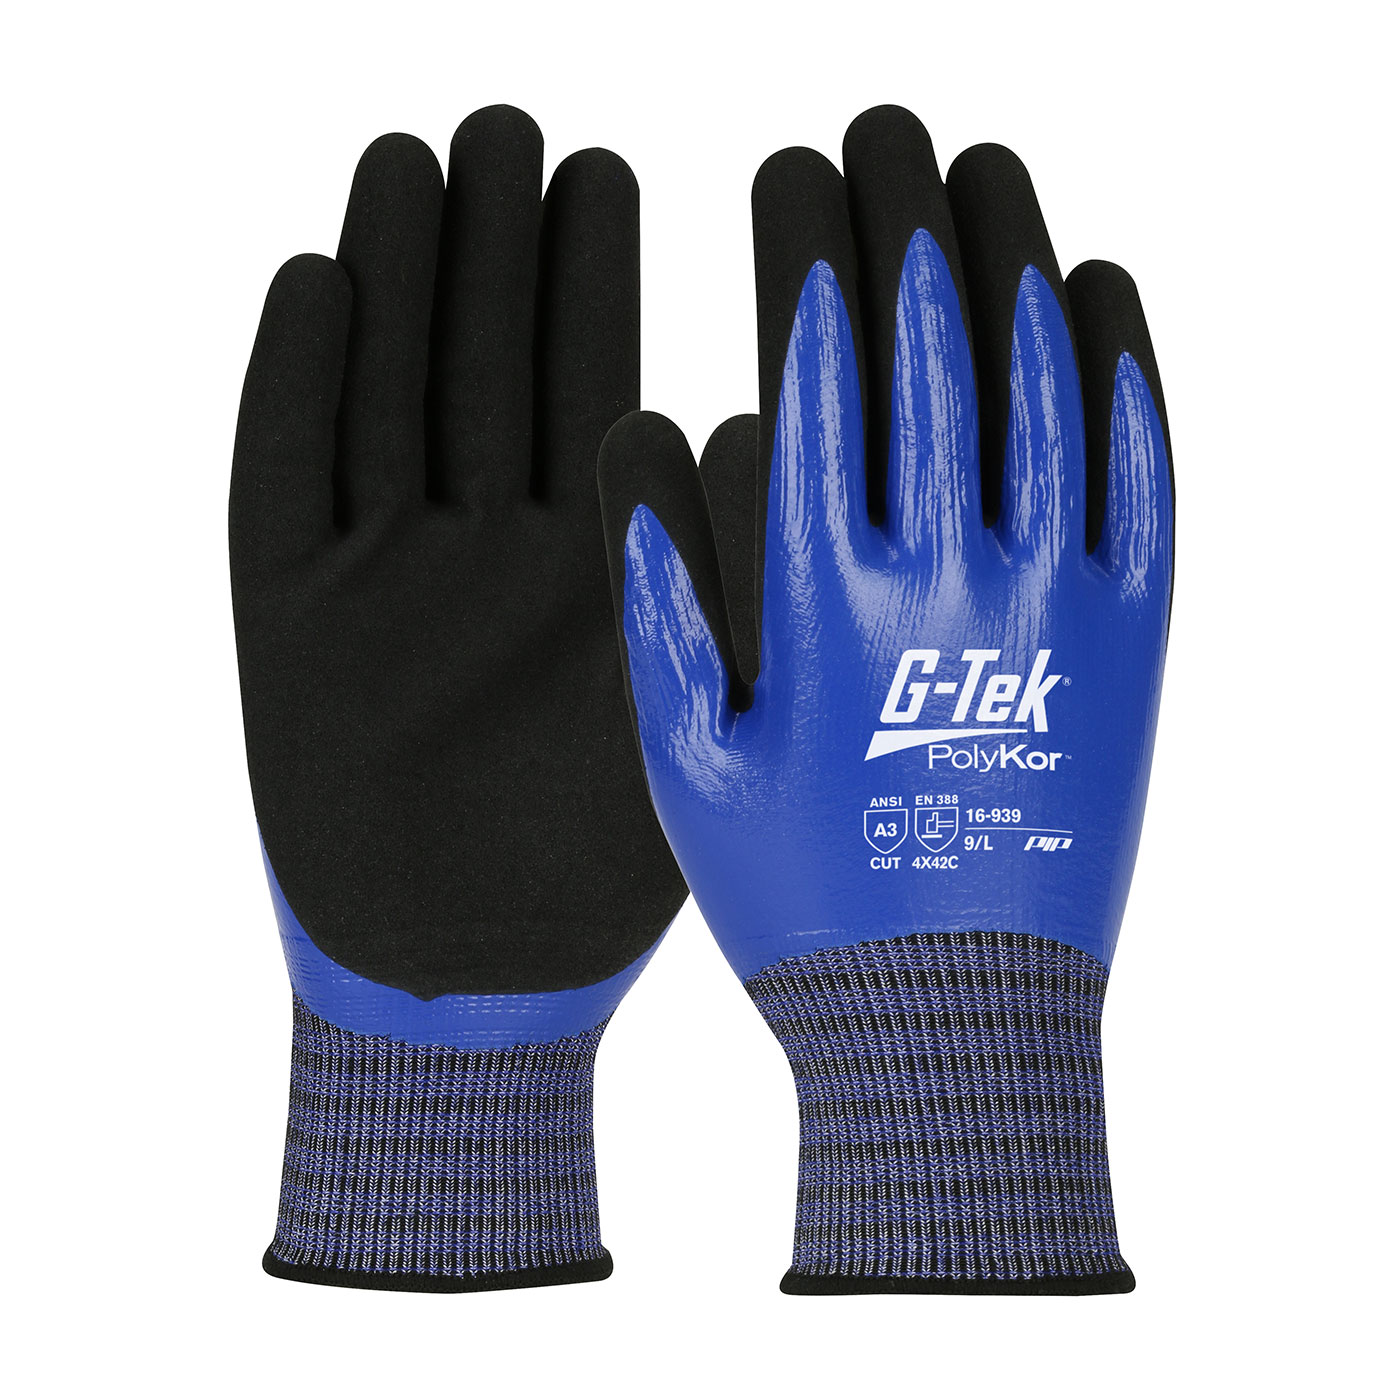 PIP® G-Tek® PolyKor® X7™ Fully Coated Seamless Knit X7™ Blended Glove with nitrile microsurface grip - Touchscreen Compatible #16-939